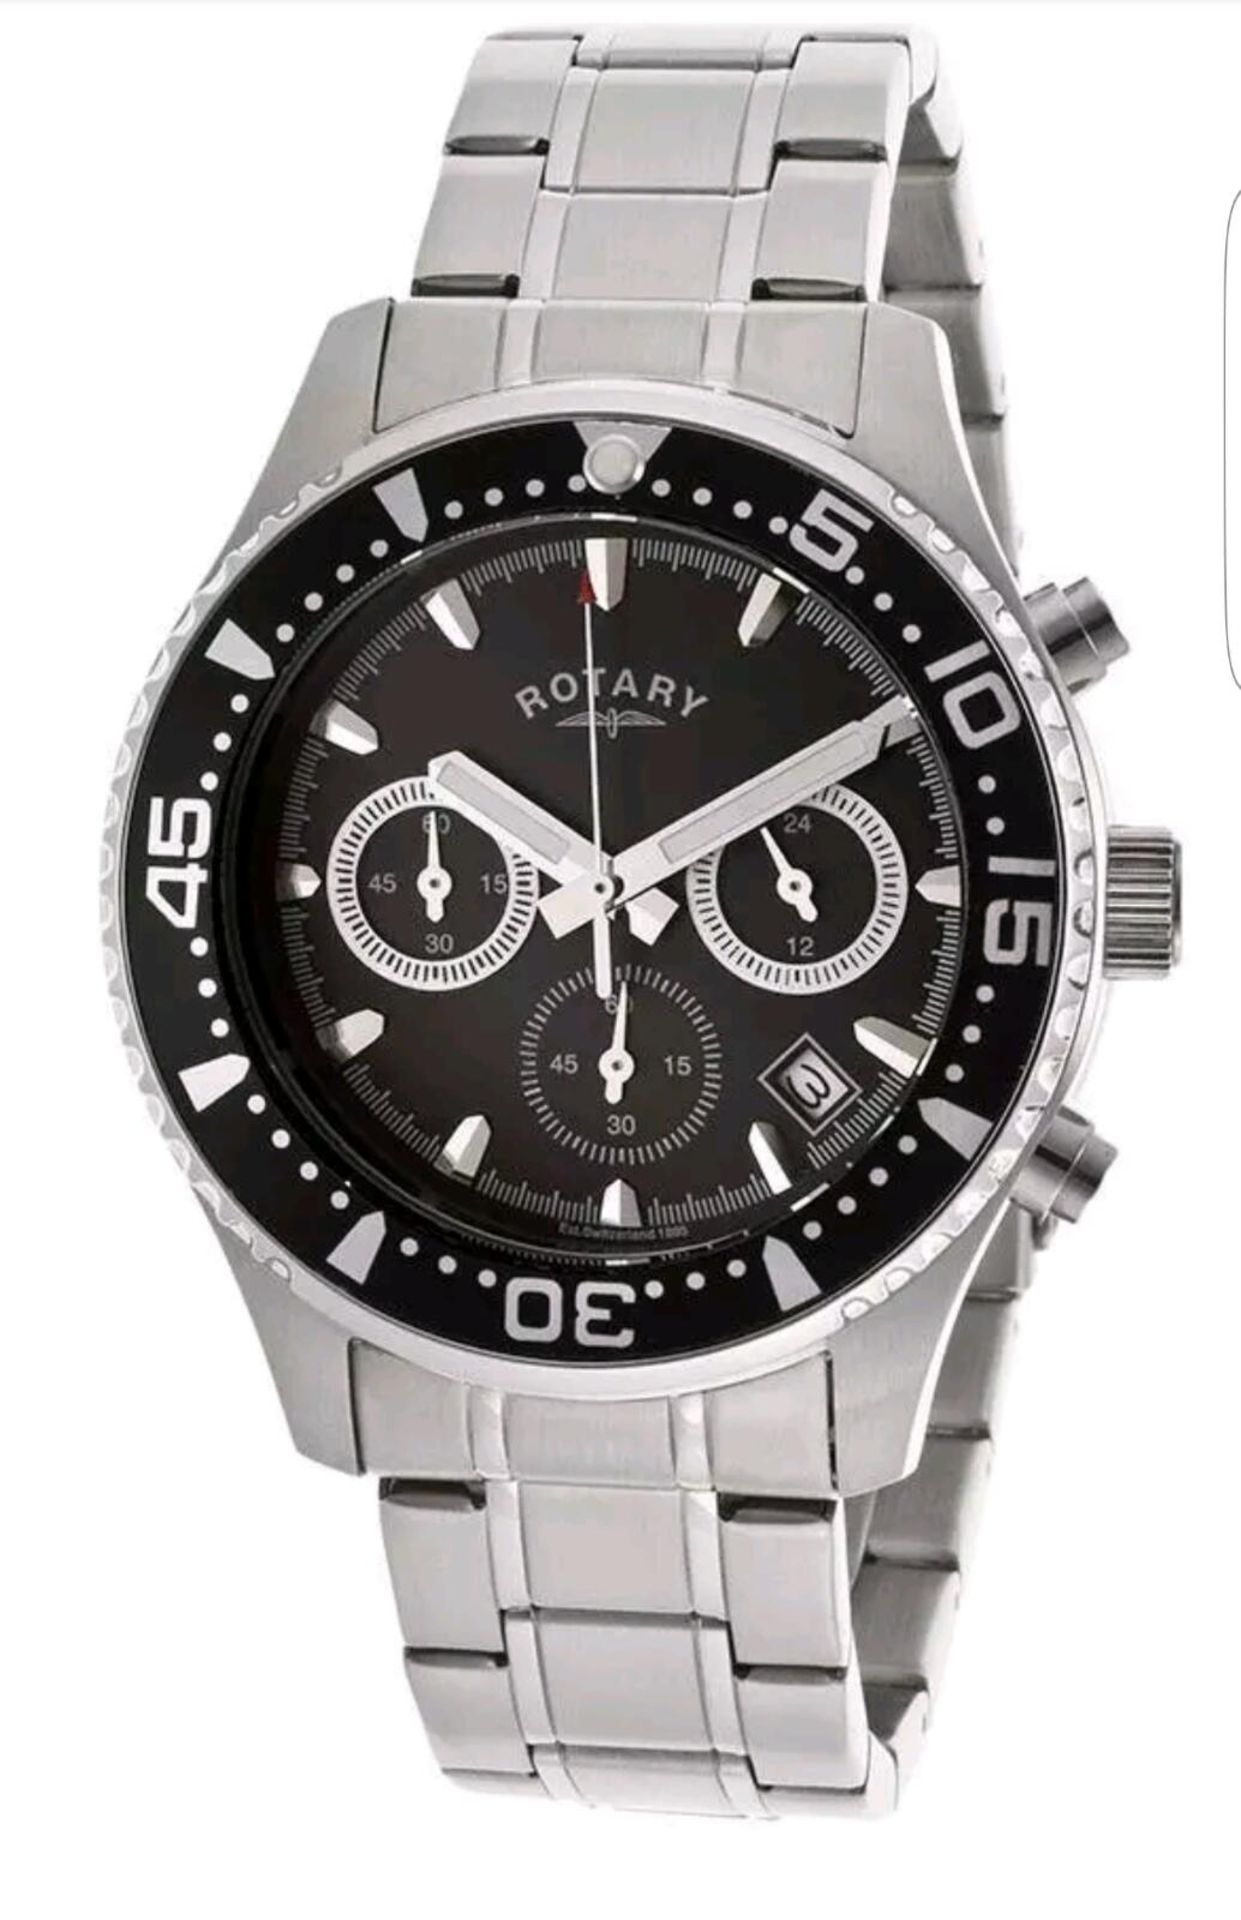 BRAND NEW ROTARY GB00014/04 MENS STAINLESS STEEL CHRONOGRAPH WATCH, COMPLETE WITH ORIGINAL BOX AND